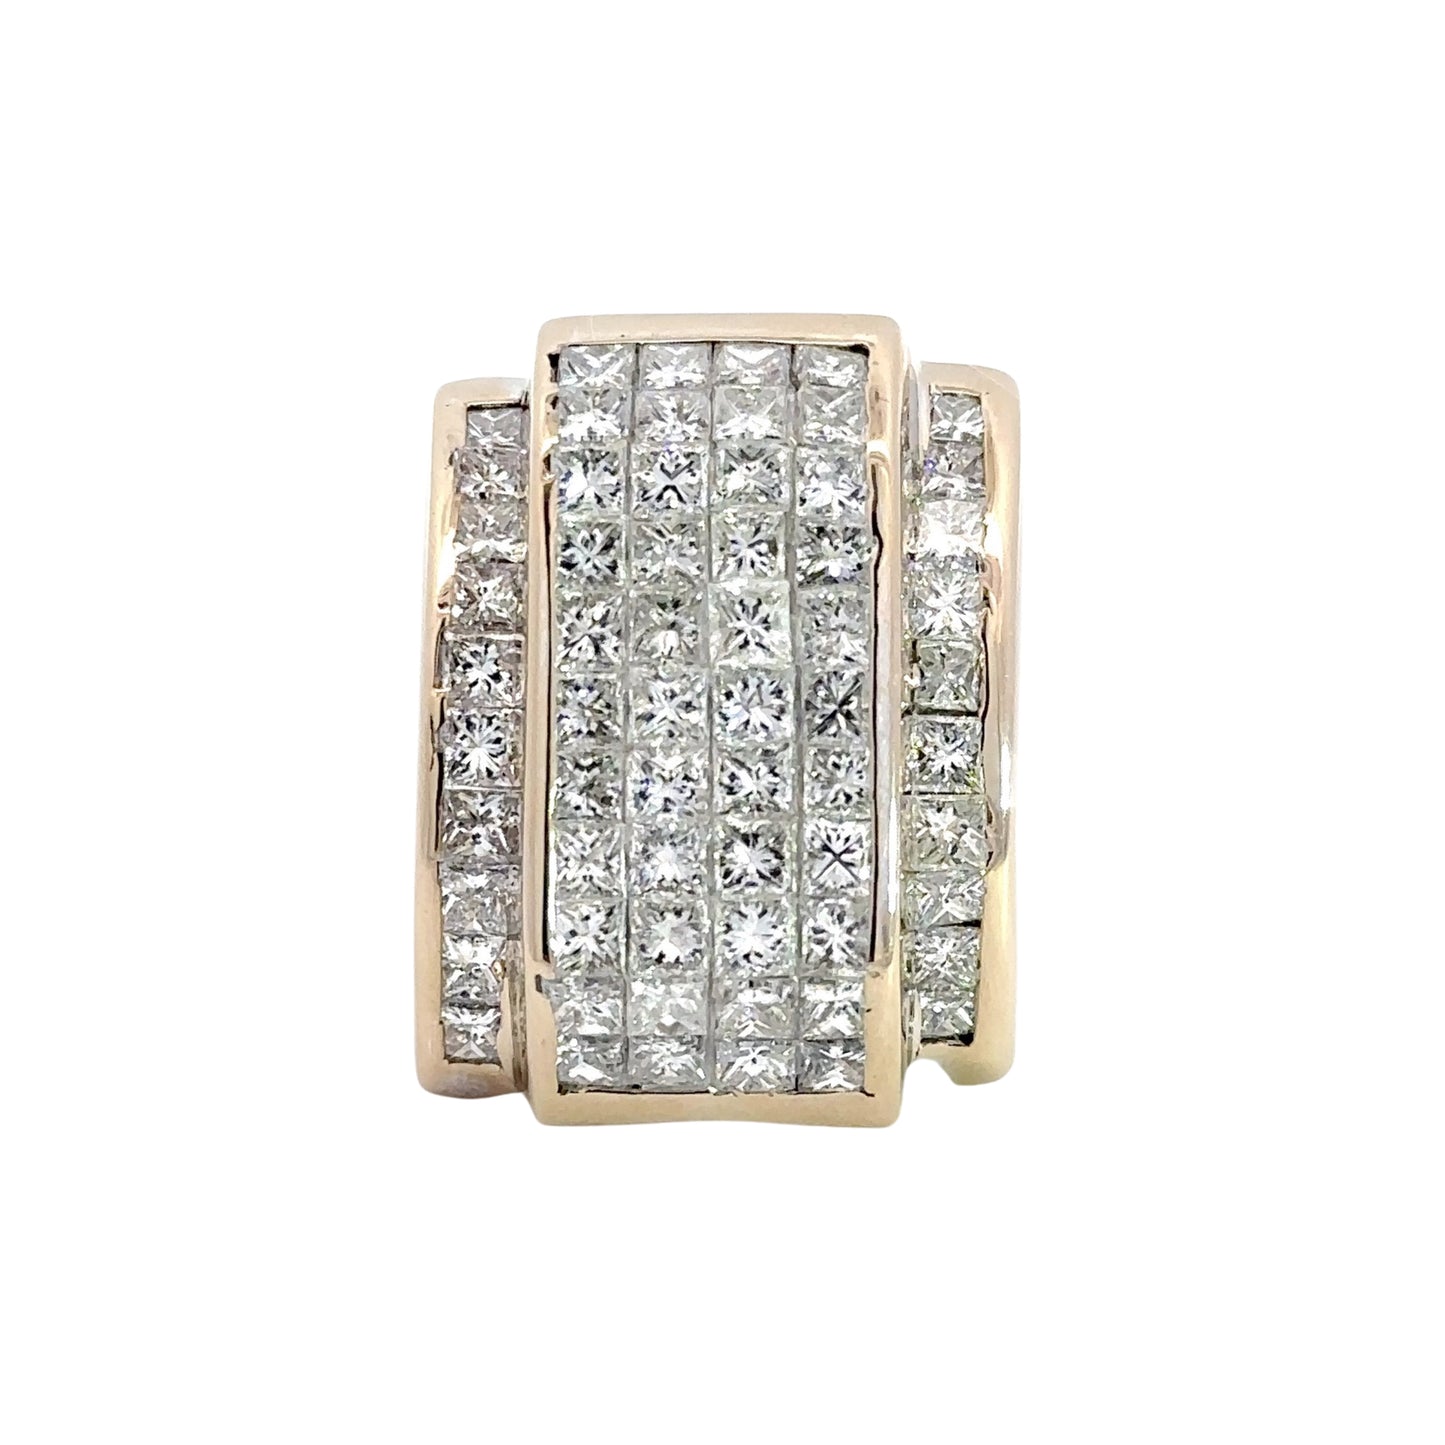 Men's Rectangle-shaped ring with 1 big rectangle column in the center with 4 rows of 11 princess-cut diamonds + 1 side row on each side with 10 princess-cut diamonds each